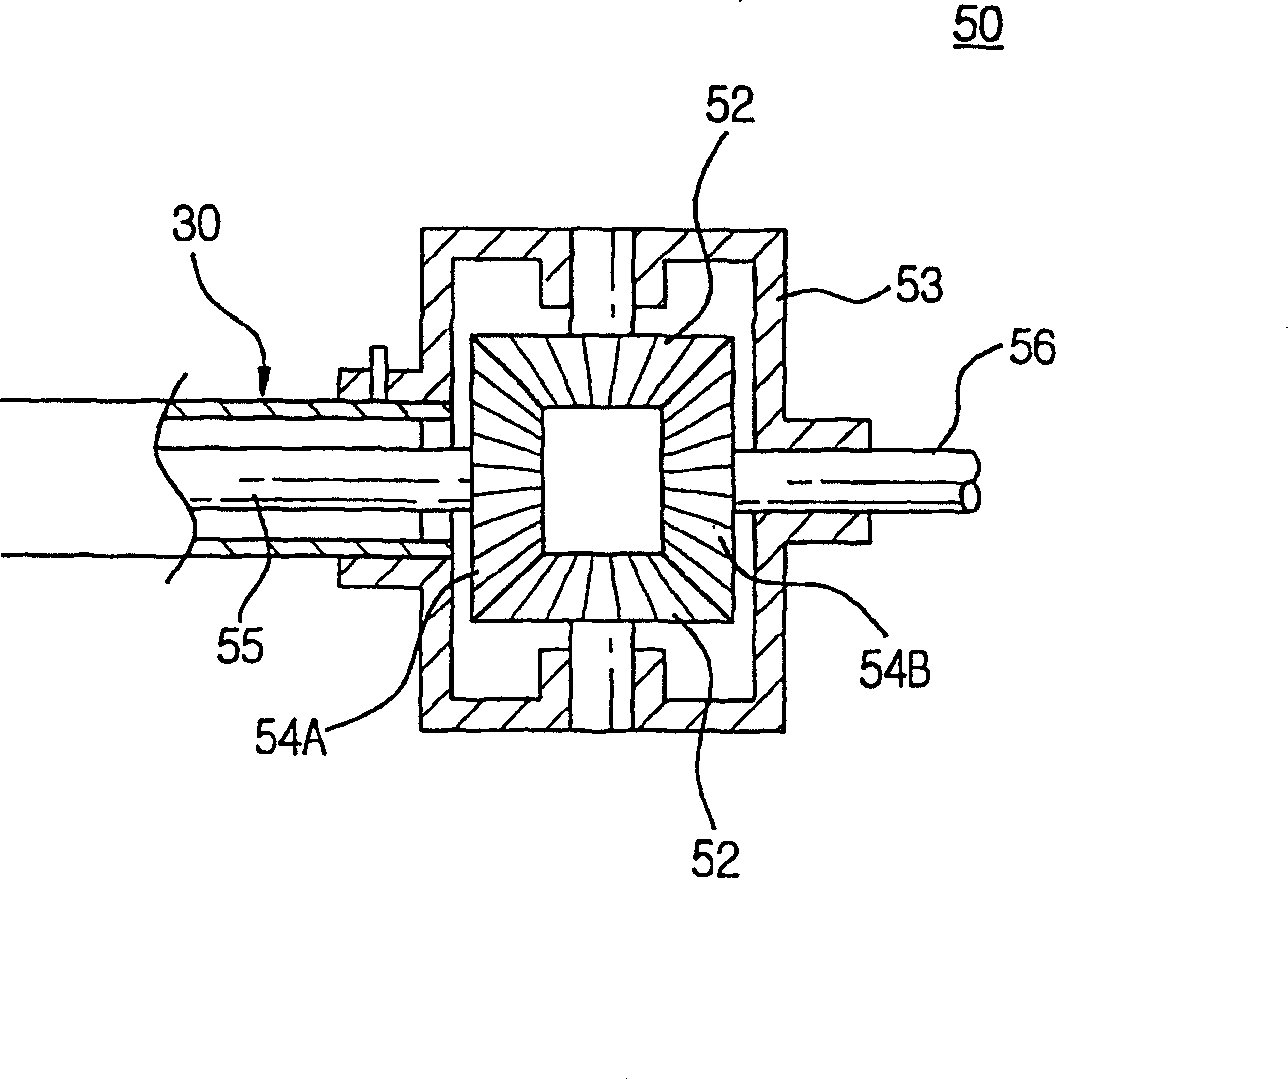 Power transmission device for automobile